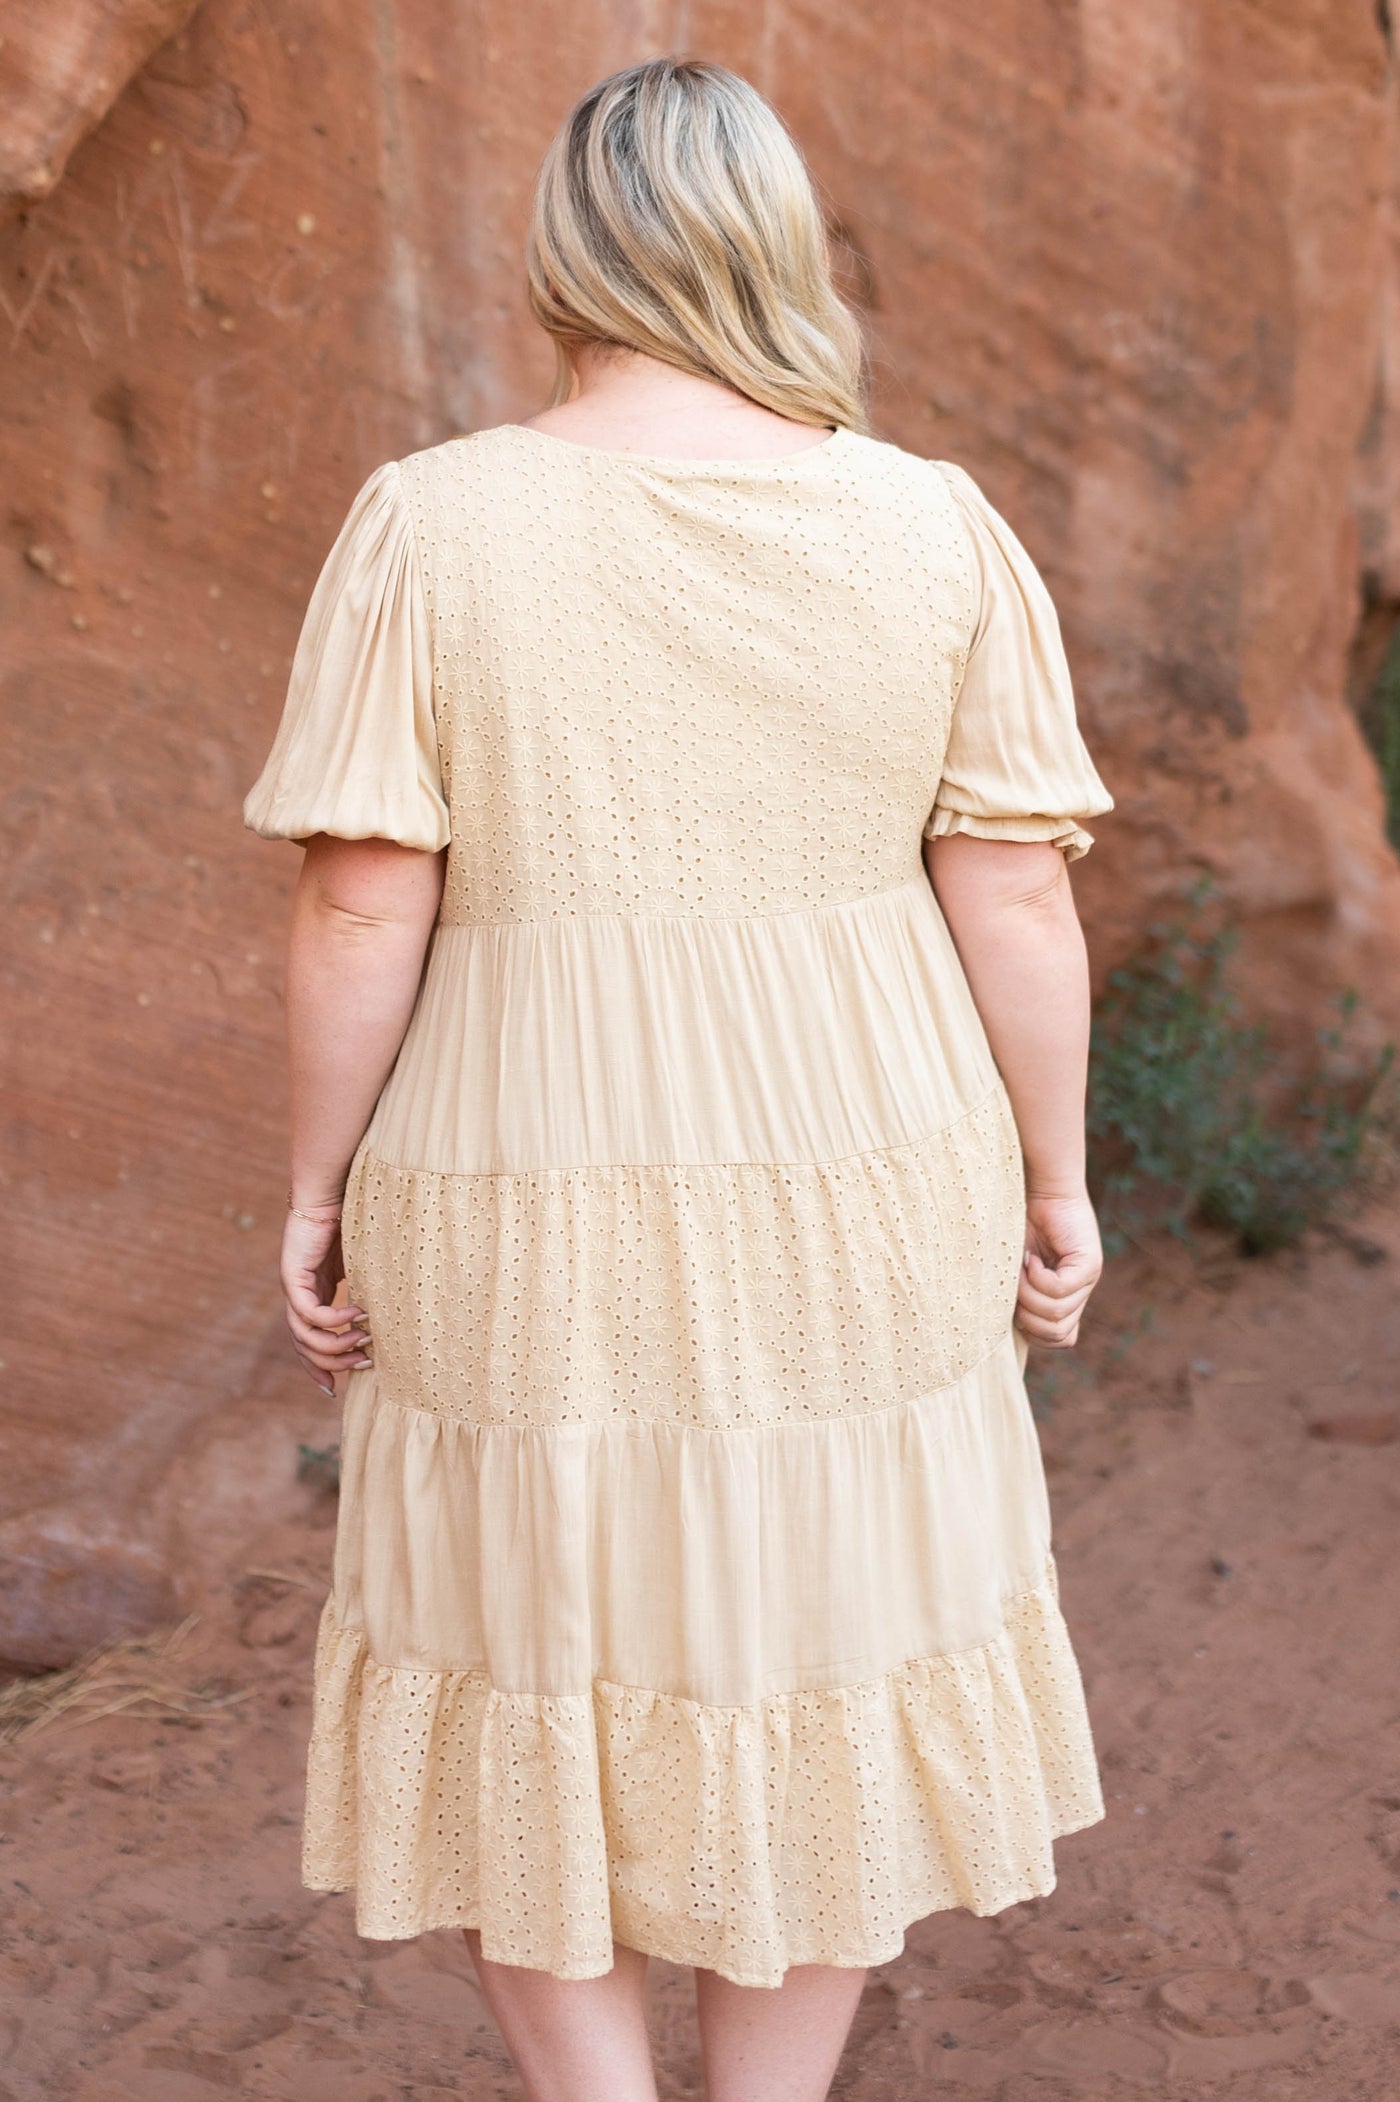 Back view of a beige dress